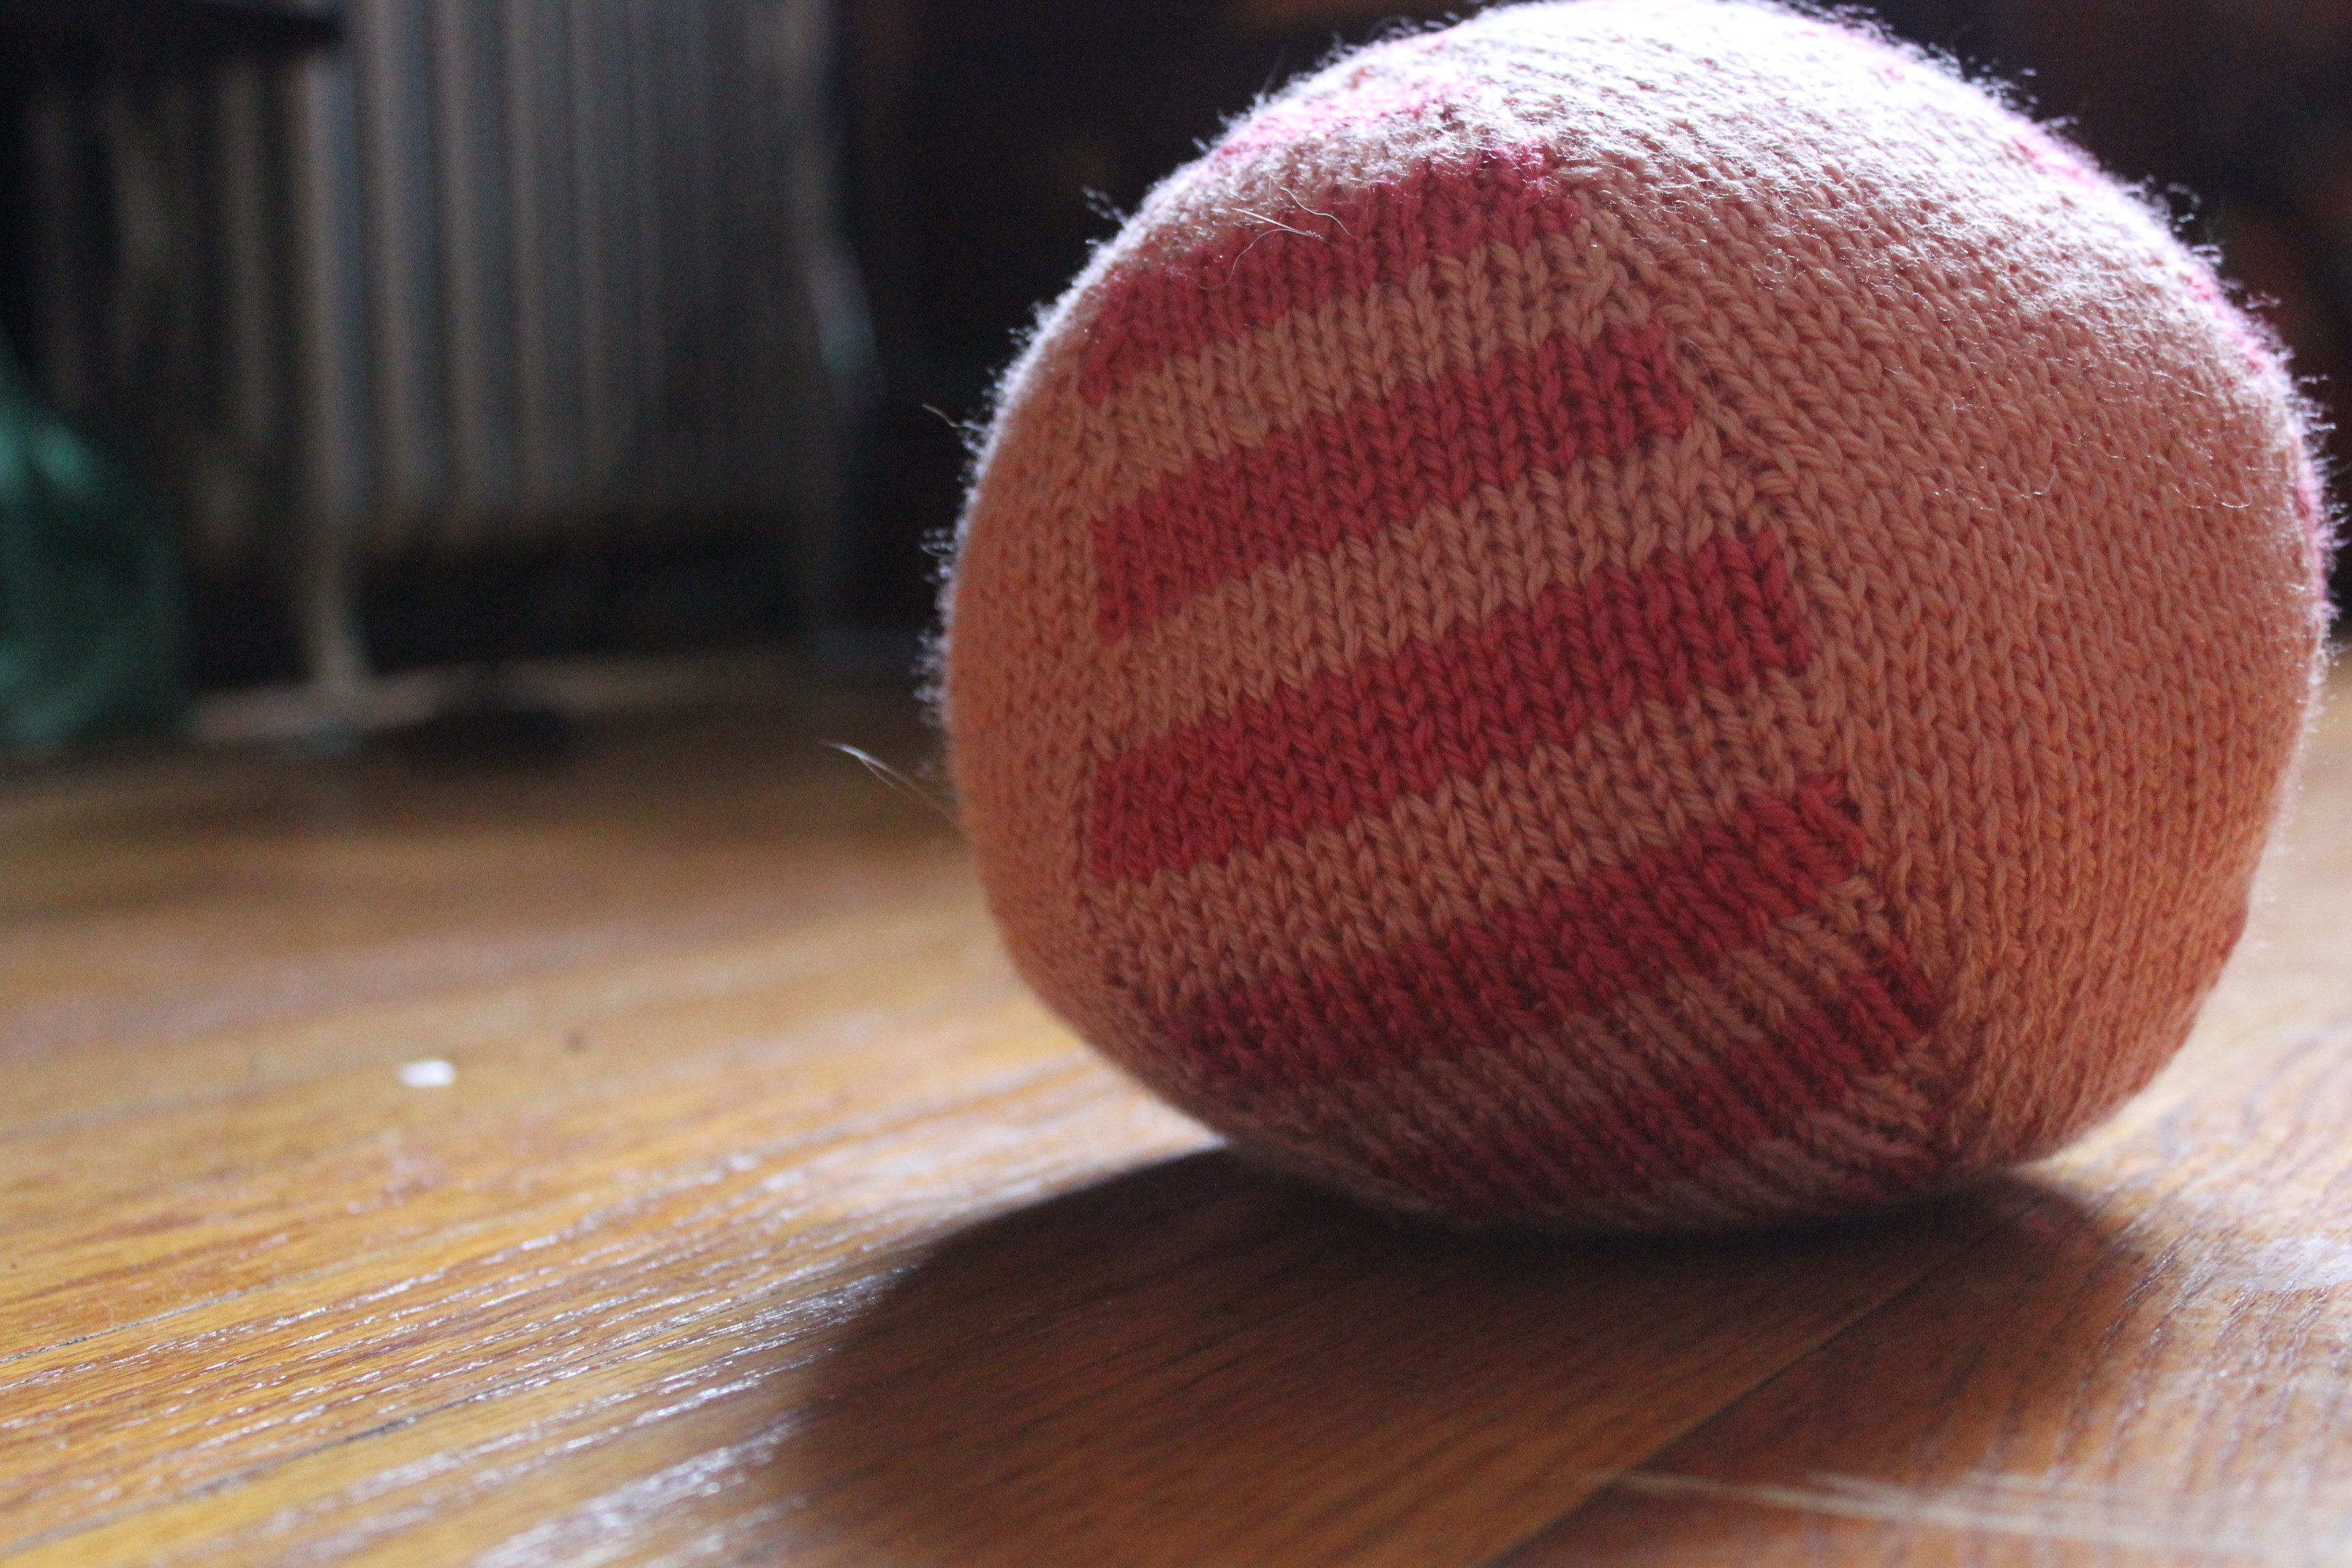 Knitting Patterns For Baby Toys Stripy Ball Knitting Pattern Ba Toy Knitted Toys The Sweatshop